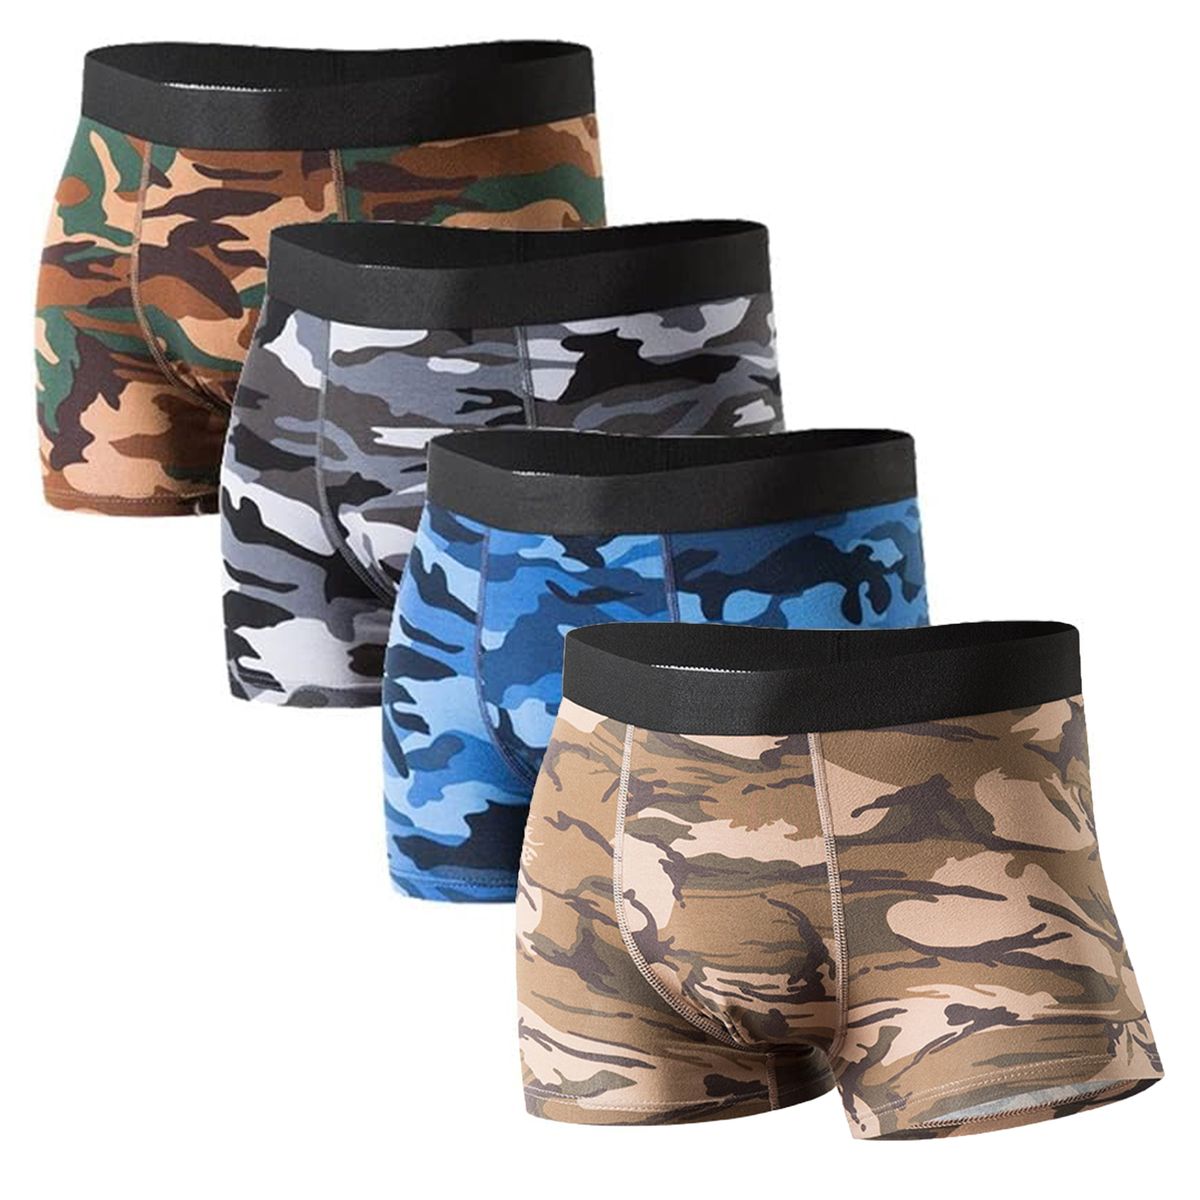 Everyday Comfort Men's Boxers Pack, Cotton Stretch, Camo Grey & Assorted,  3-Pack